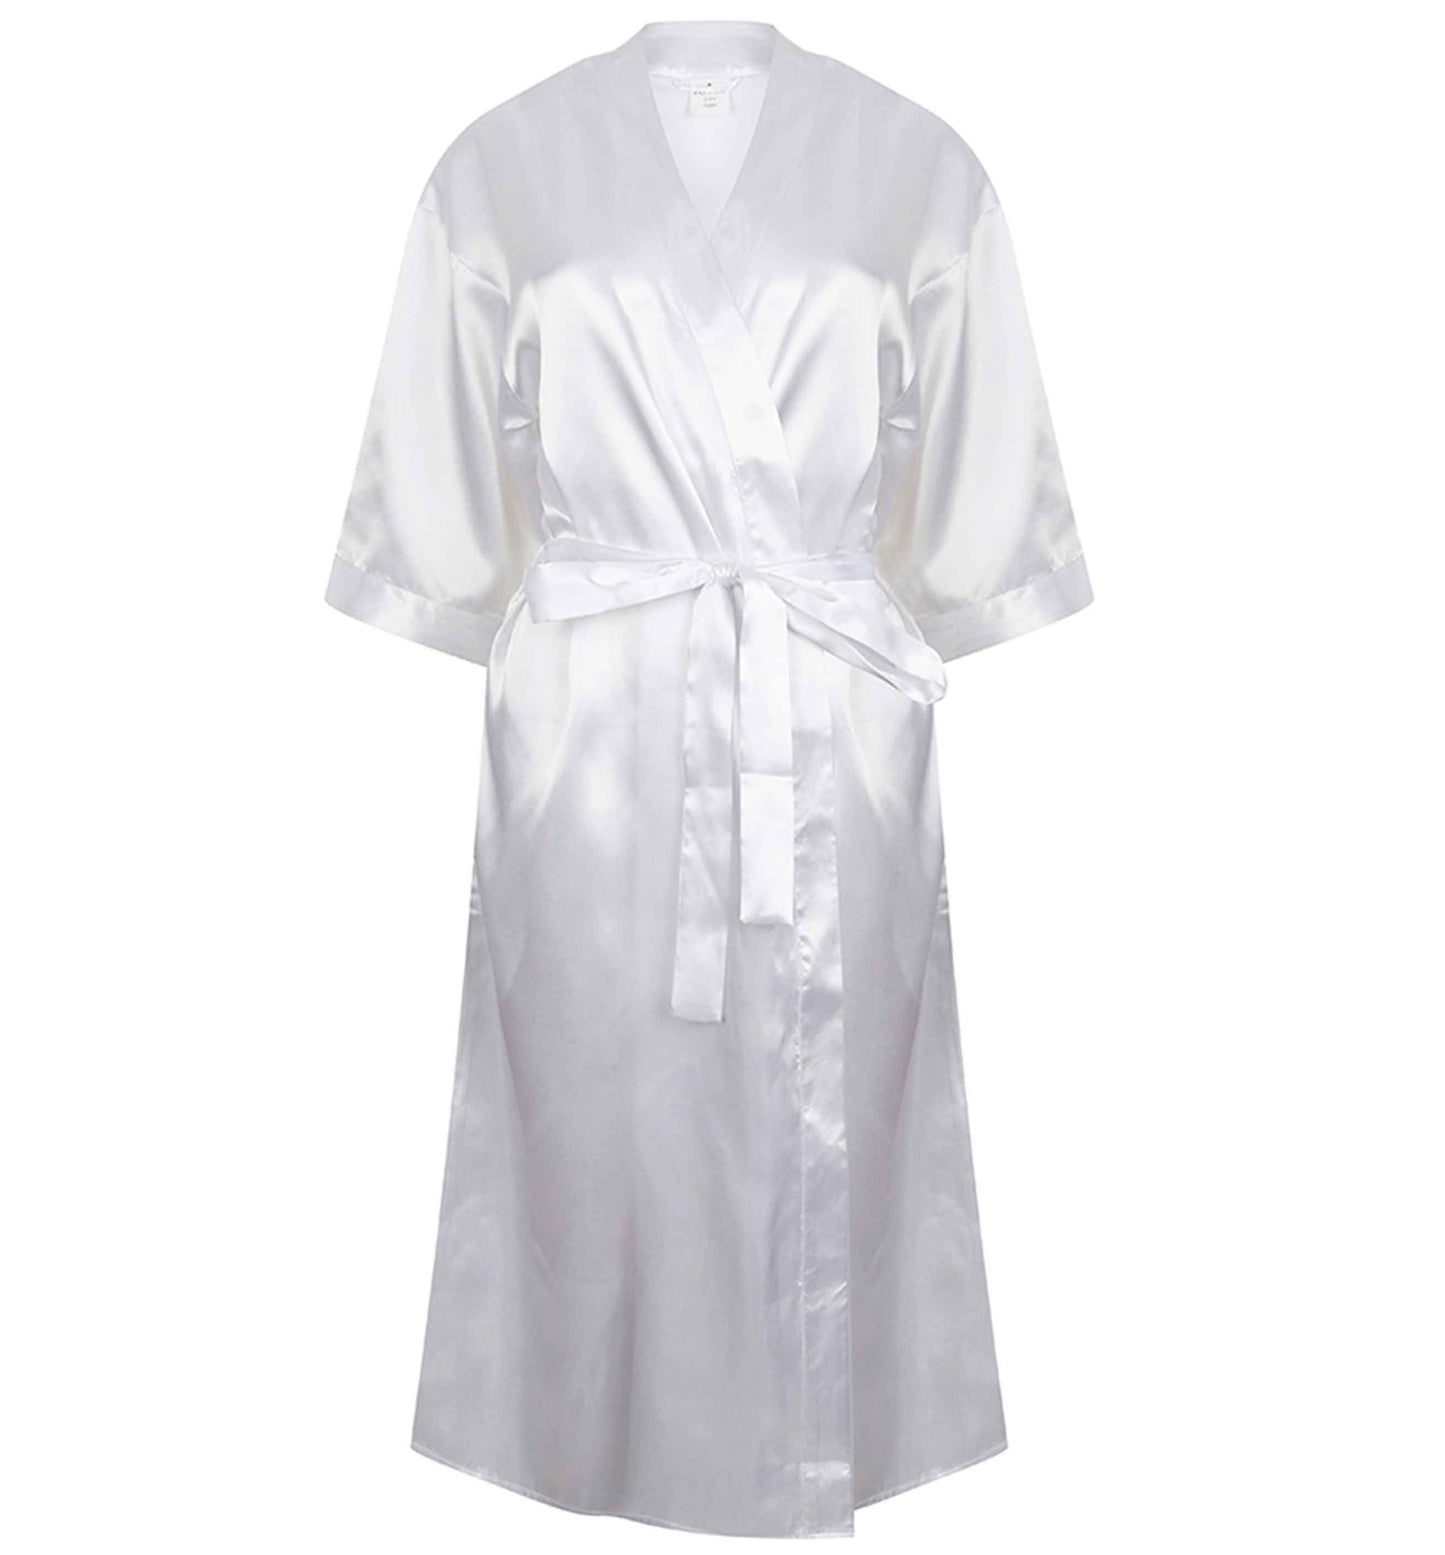 Sailing through life one cruise at a time - personalised |  8-18 | Kimono style satin robe | Ladies dressing gown